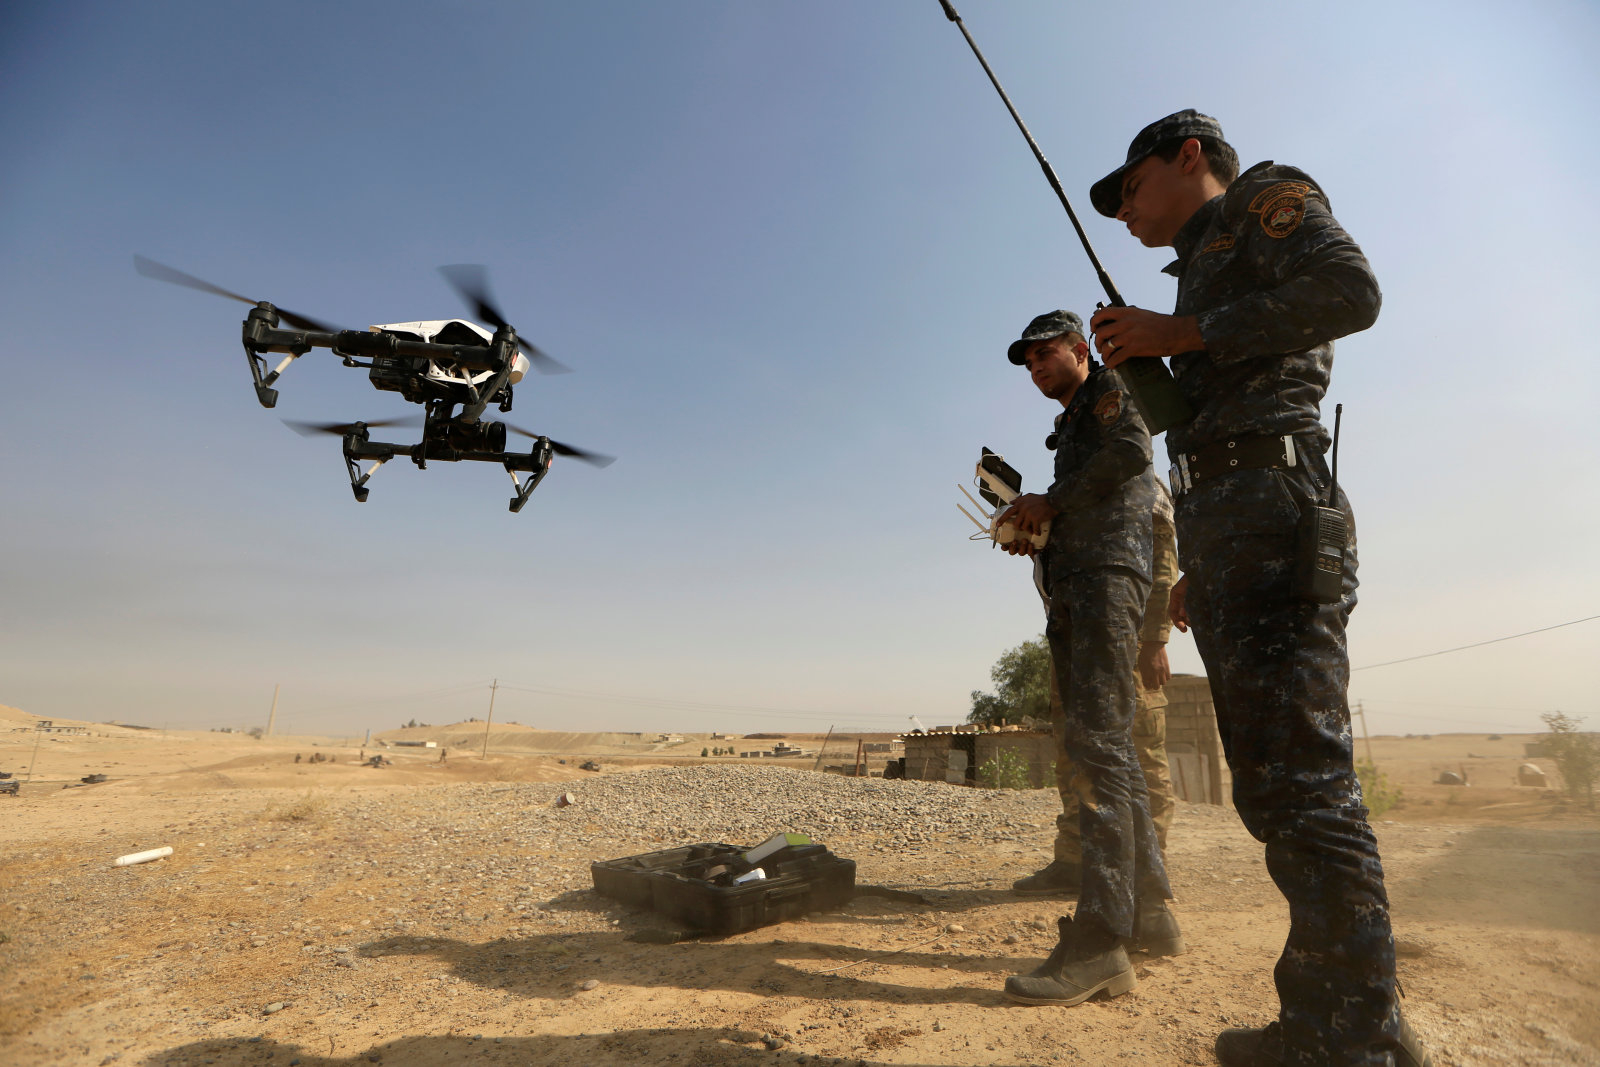 Commercial Drones are being used by Terrorists as Bombers